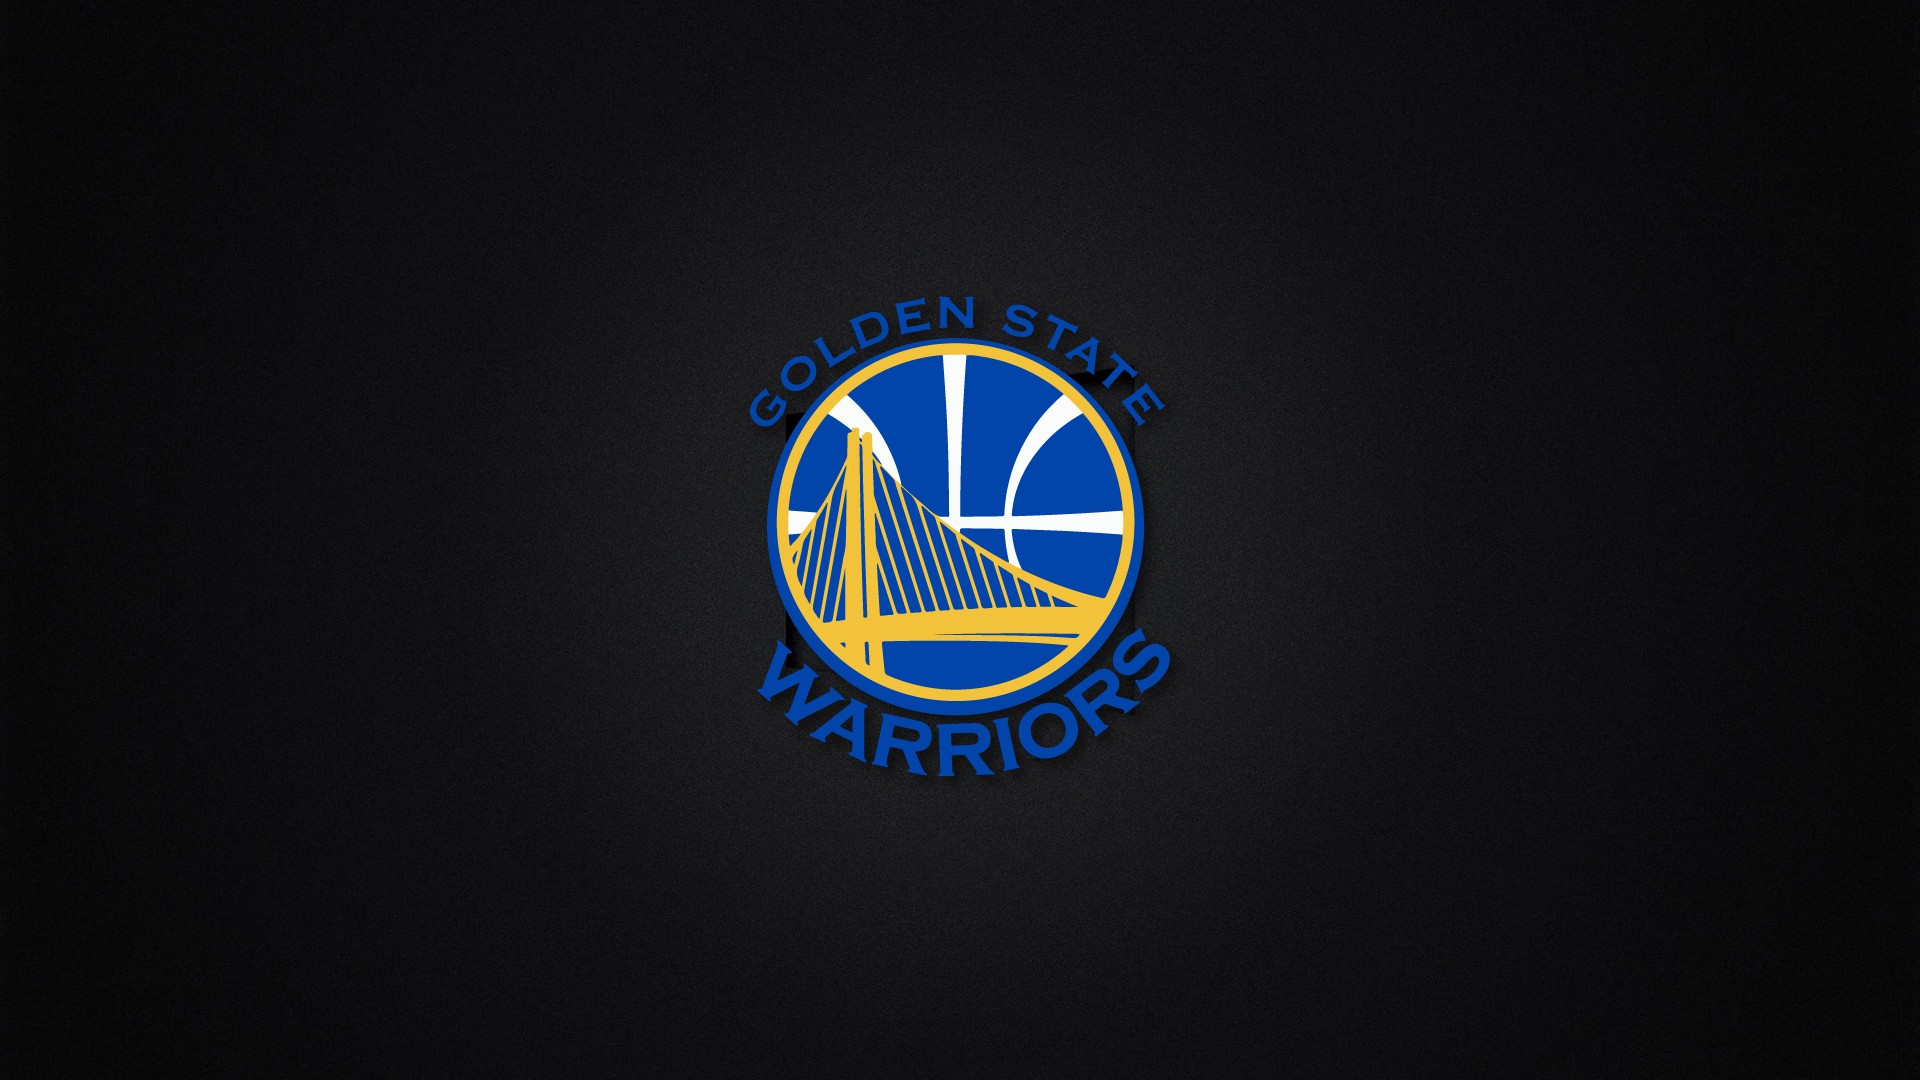 Wallpaper Desktop Golden State Warriors NBA HD with image dimensions 1920x1080 pixel. You can make this wallpaper for your Desktop Computer Backgrounds, Windows or Mac Screensavers, iPhone Lock screen, Tablet or Android and another Mobile Phone device